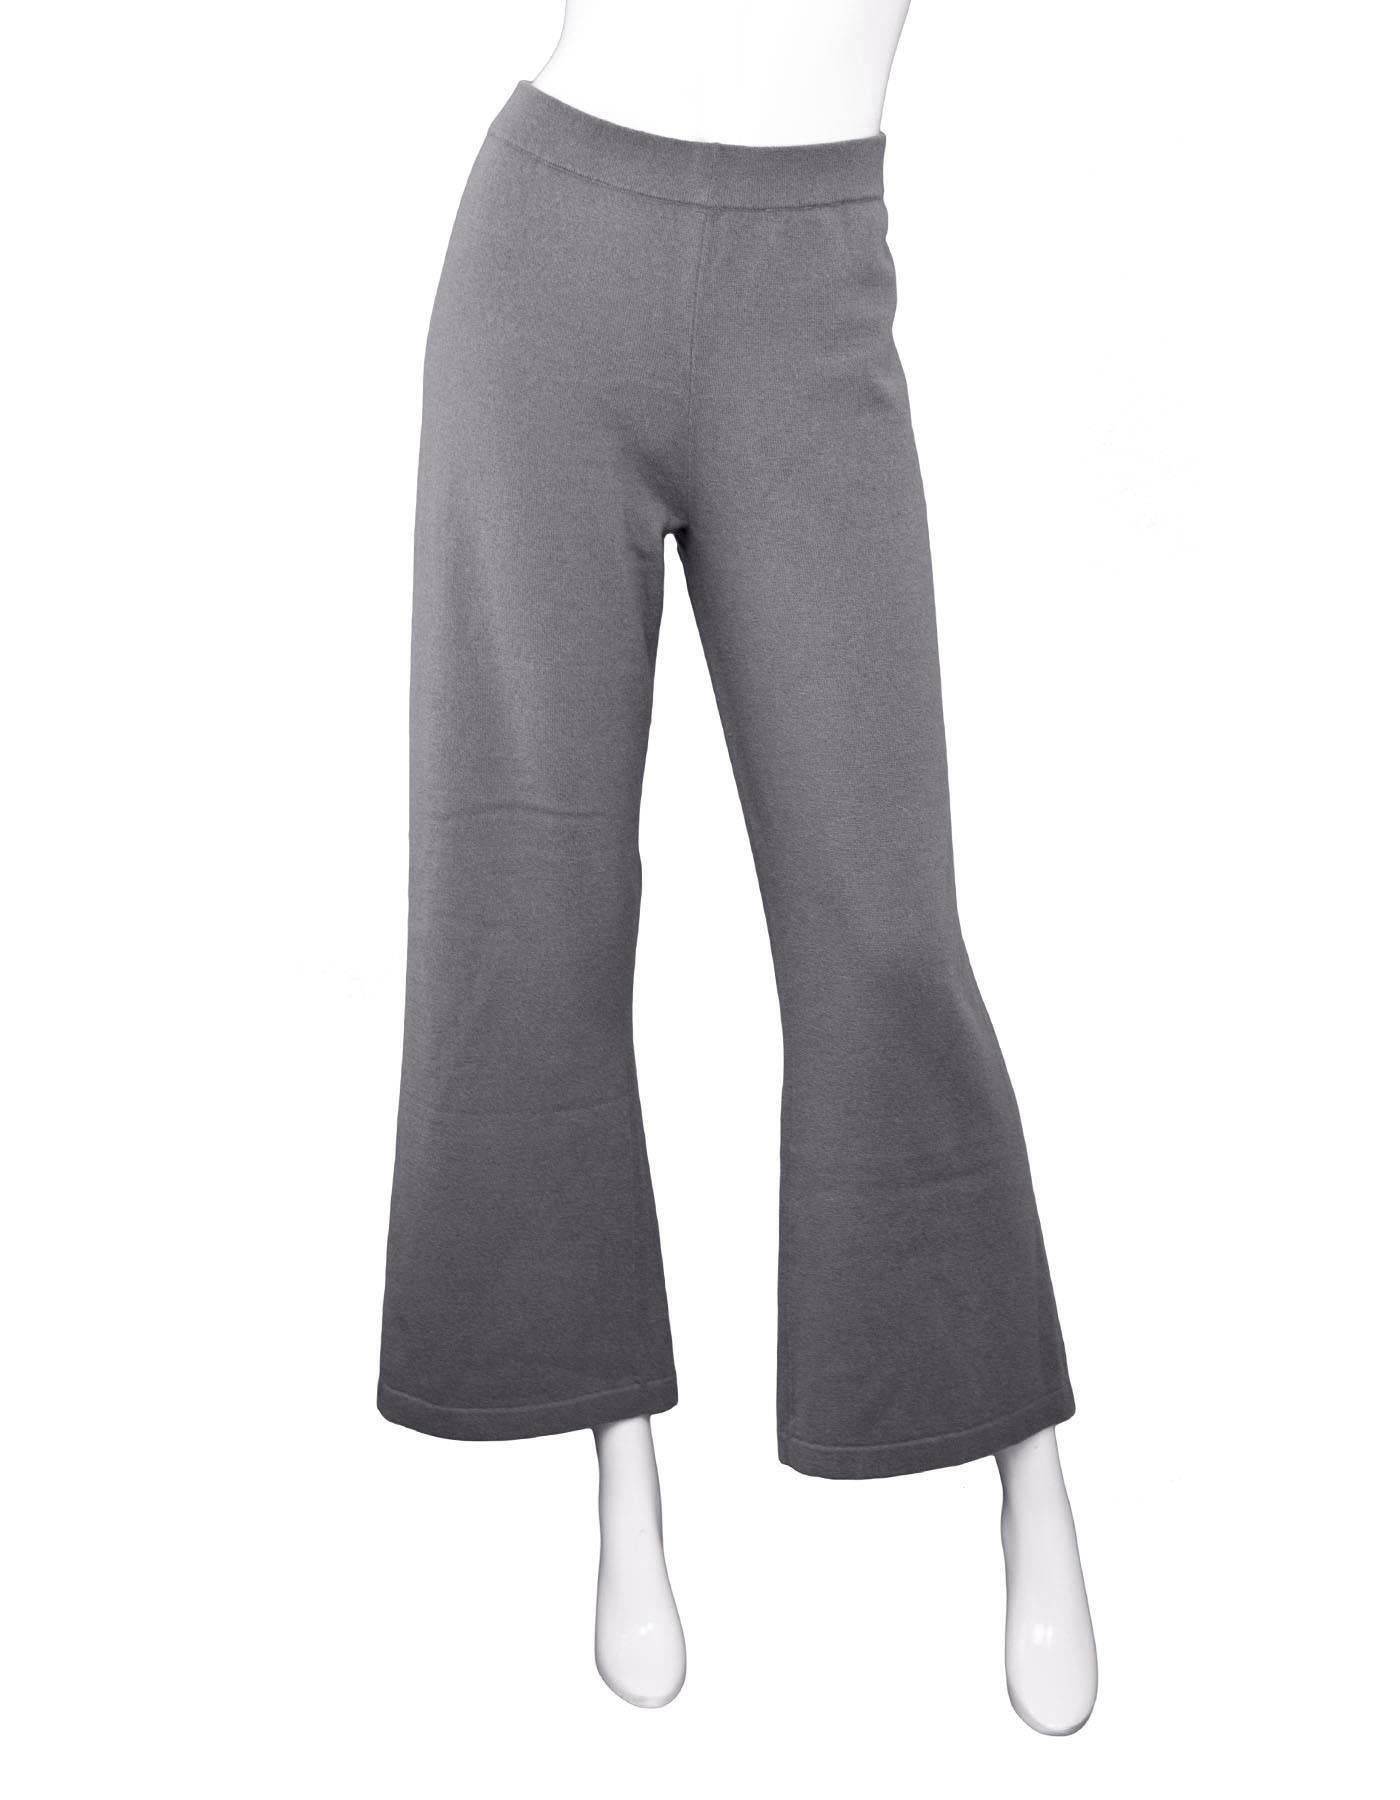 Gray Allude Taupe Cashmere Wide Leg Pants Sz M rt. $479